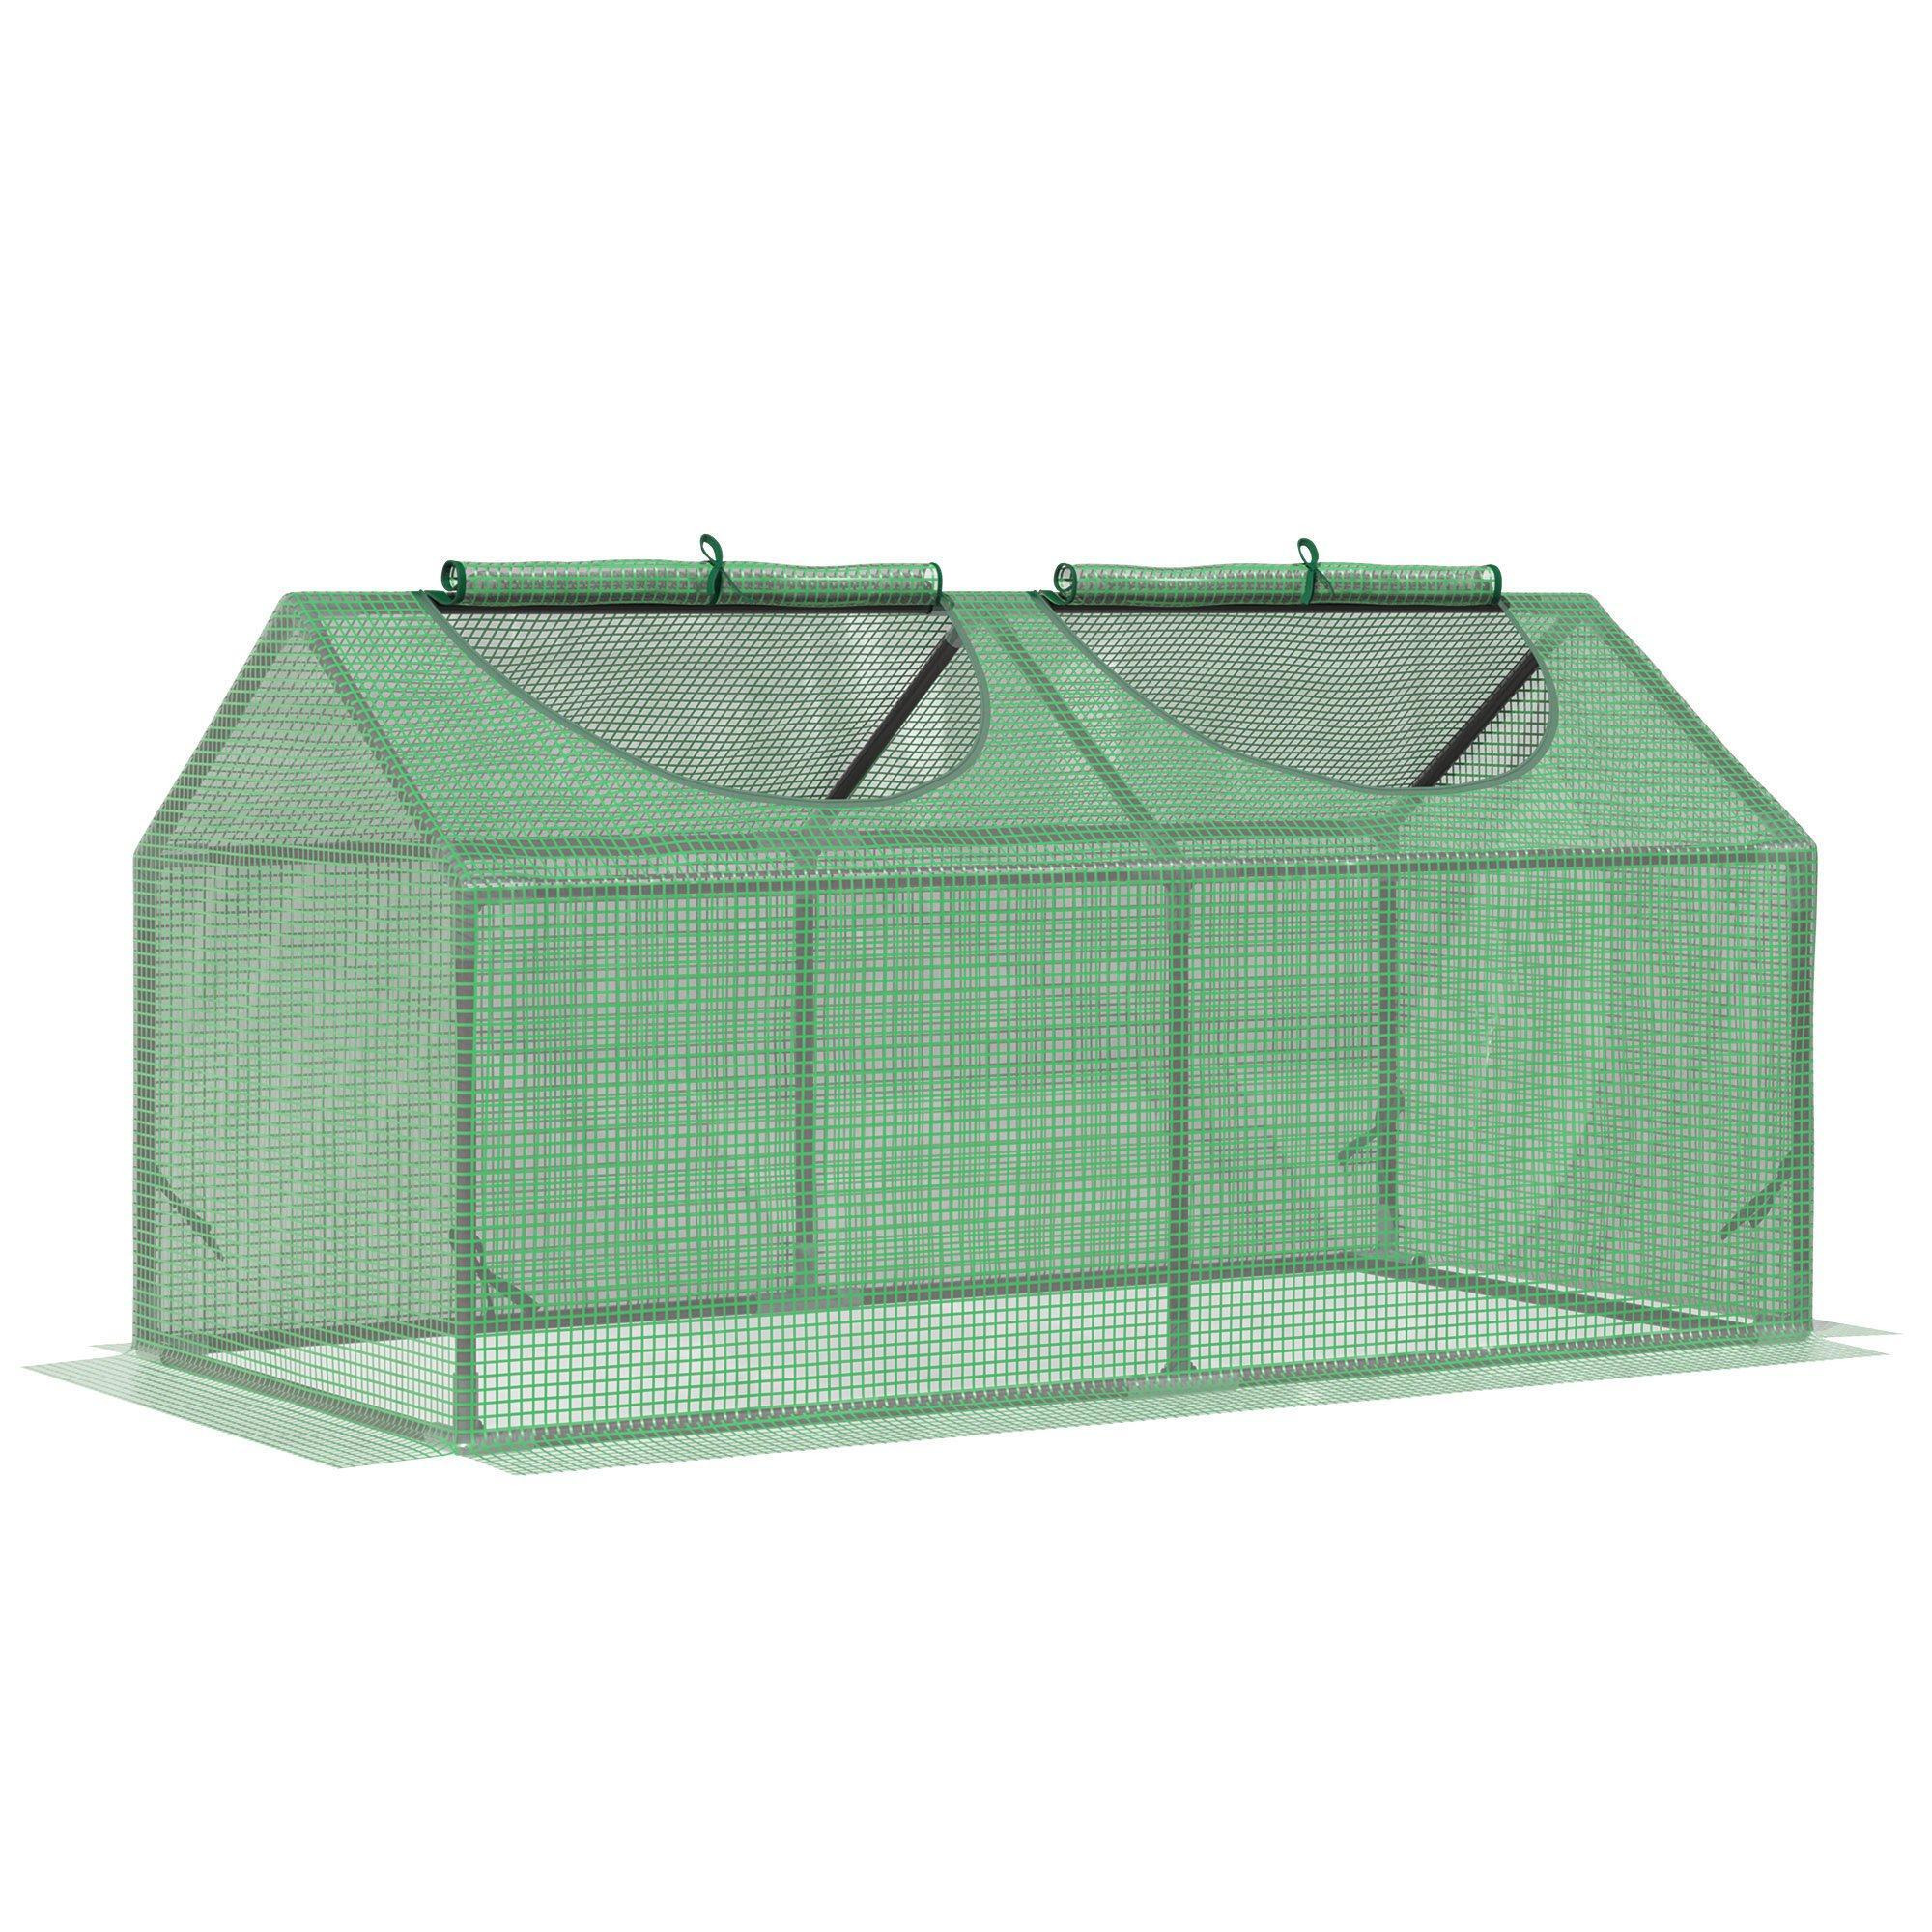 Mini Greenhouse Small Plant Grow House for Outdoor with Cover Windows - image 1